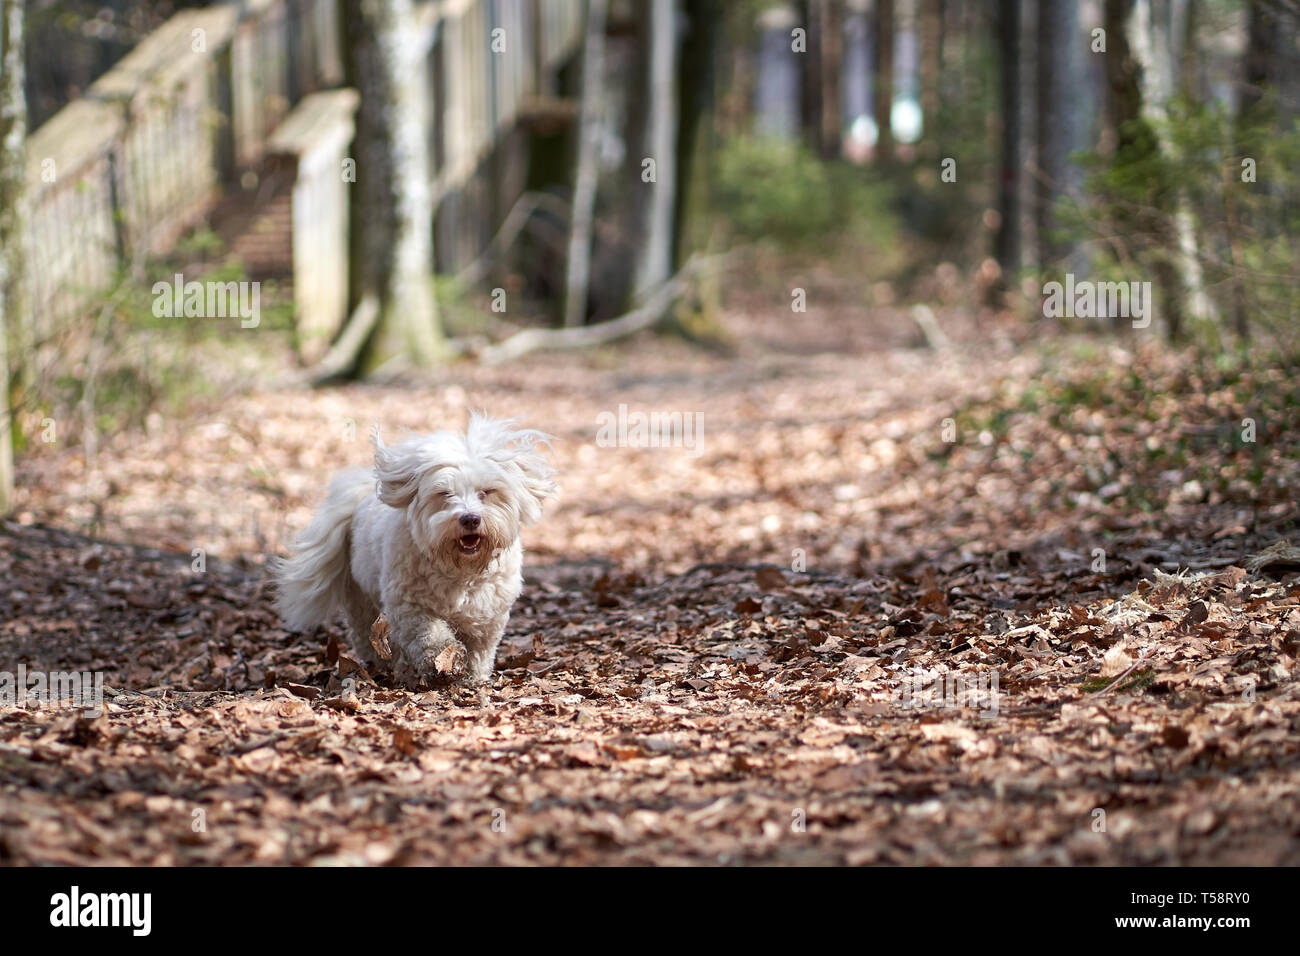 White havanese dog running in the forest Stock Photo